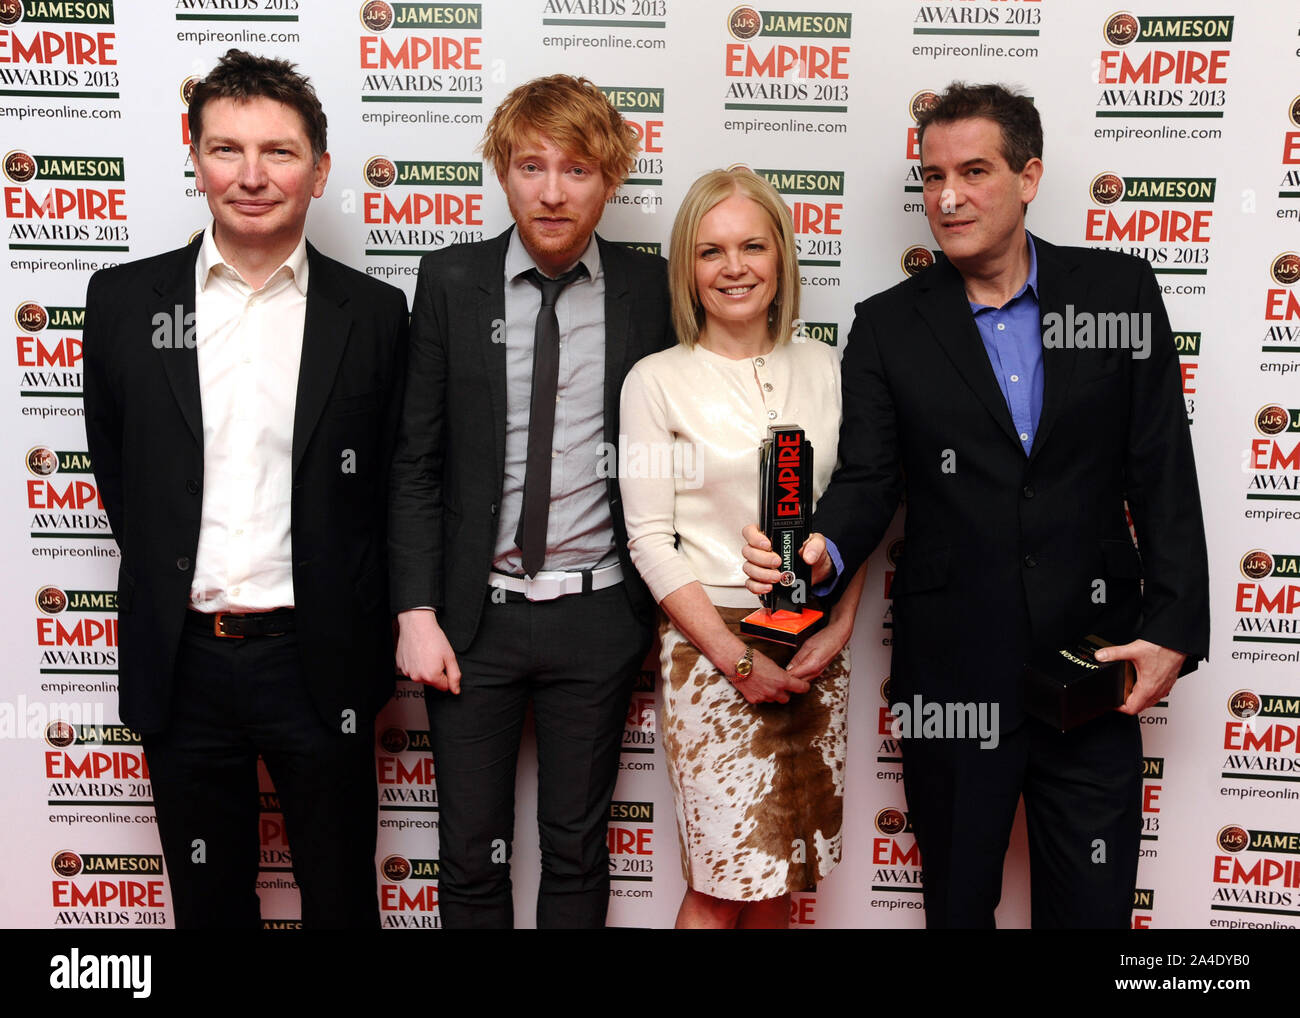 Photo Must Be Credited ©Kate Green/Alpha Press 077037 24/03/2013 Domnhall Gleeson Mariella Frostrup with Andrew Macdonald and Allon Reich Jameson Empire Film Awards 2013 Grosvenor Hotel London Stock Photo